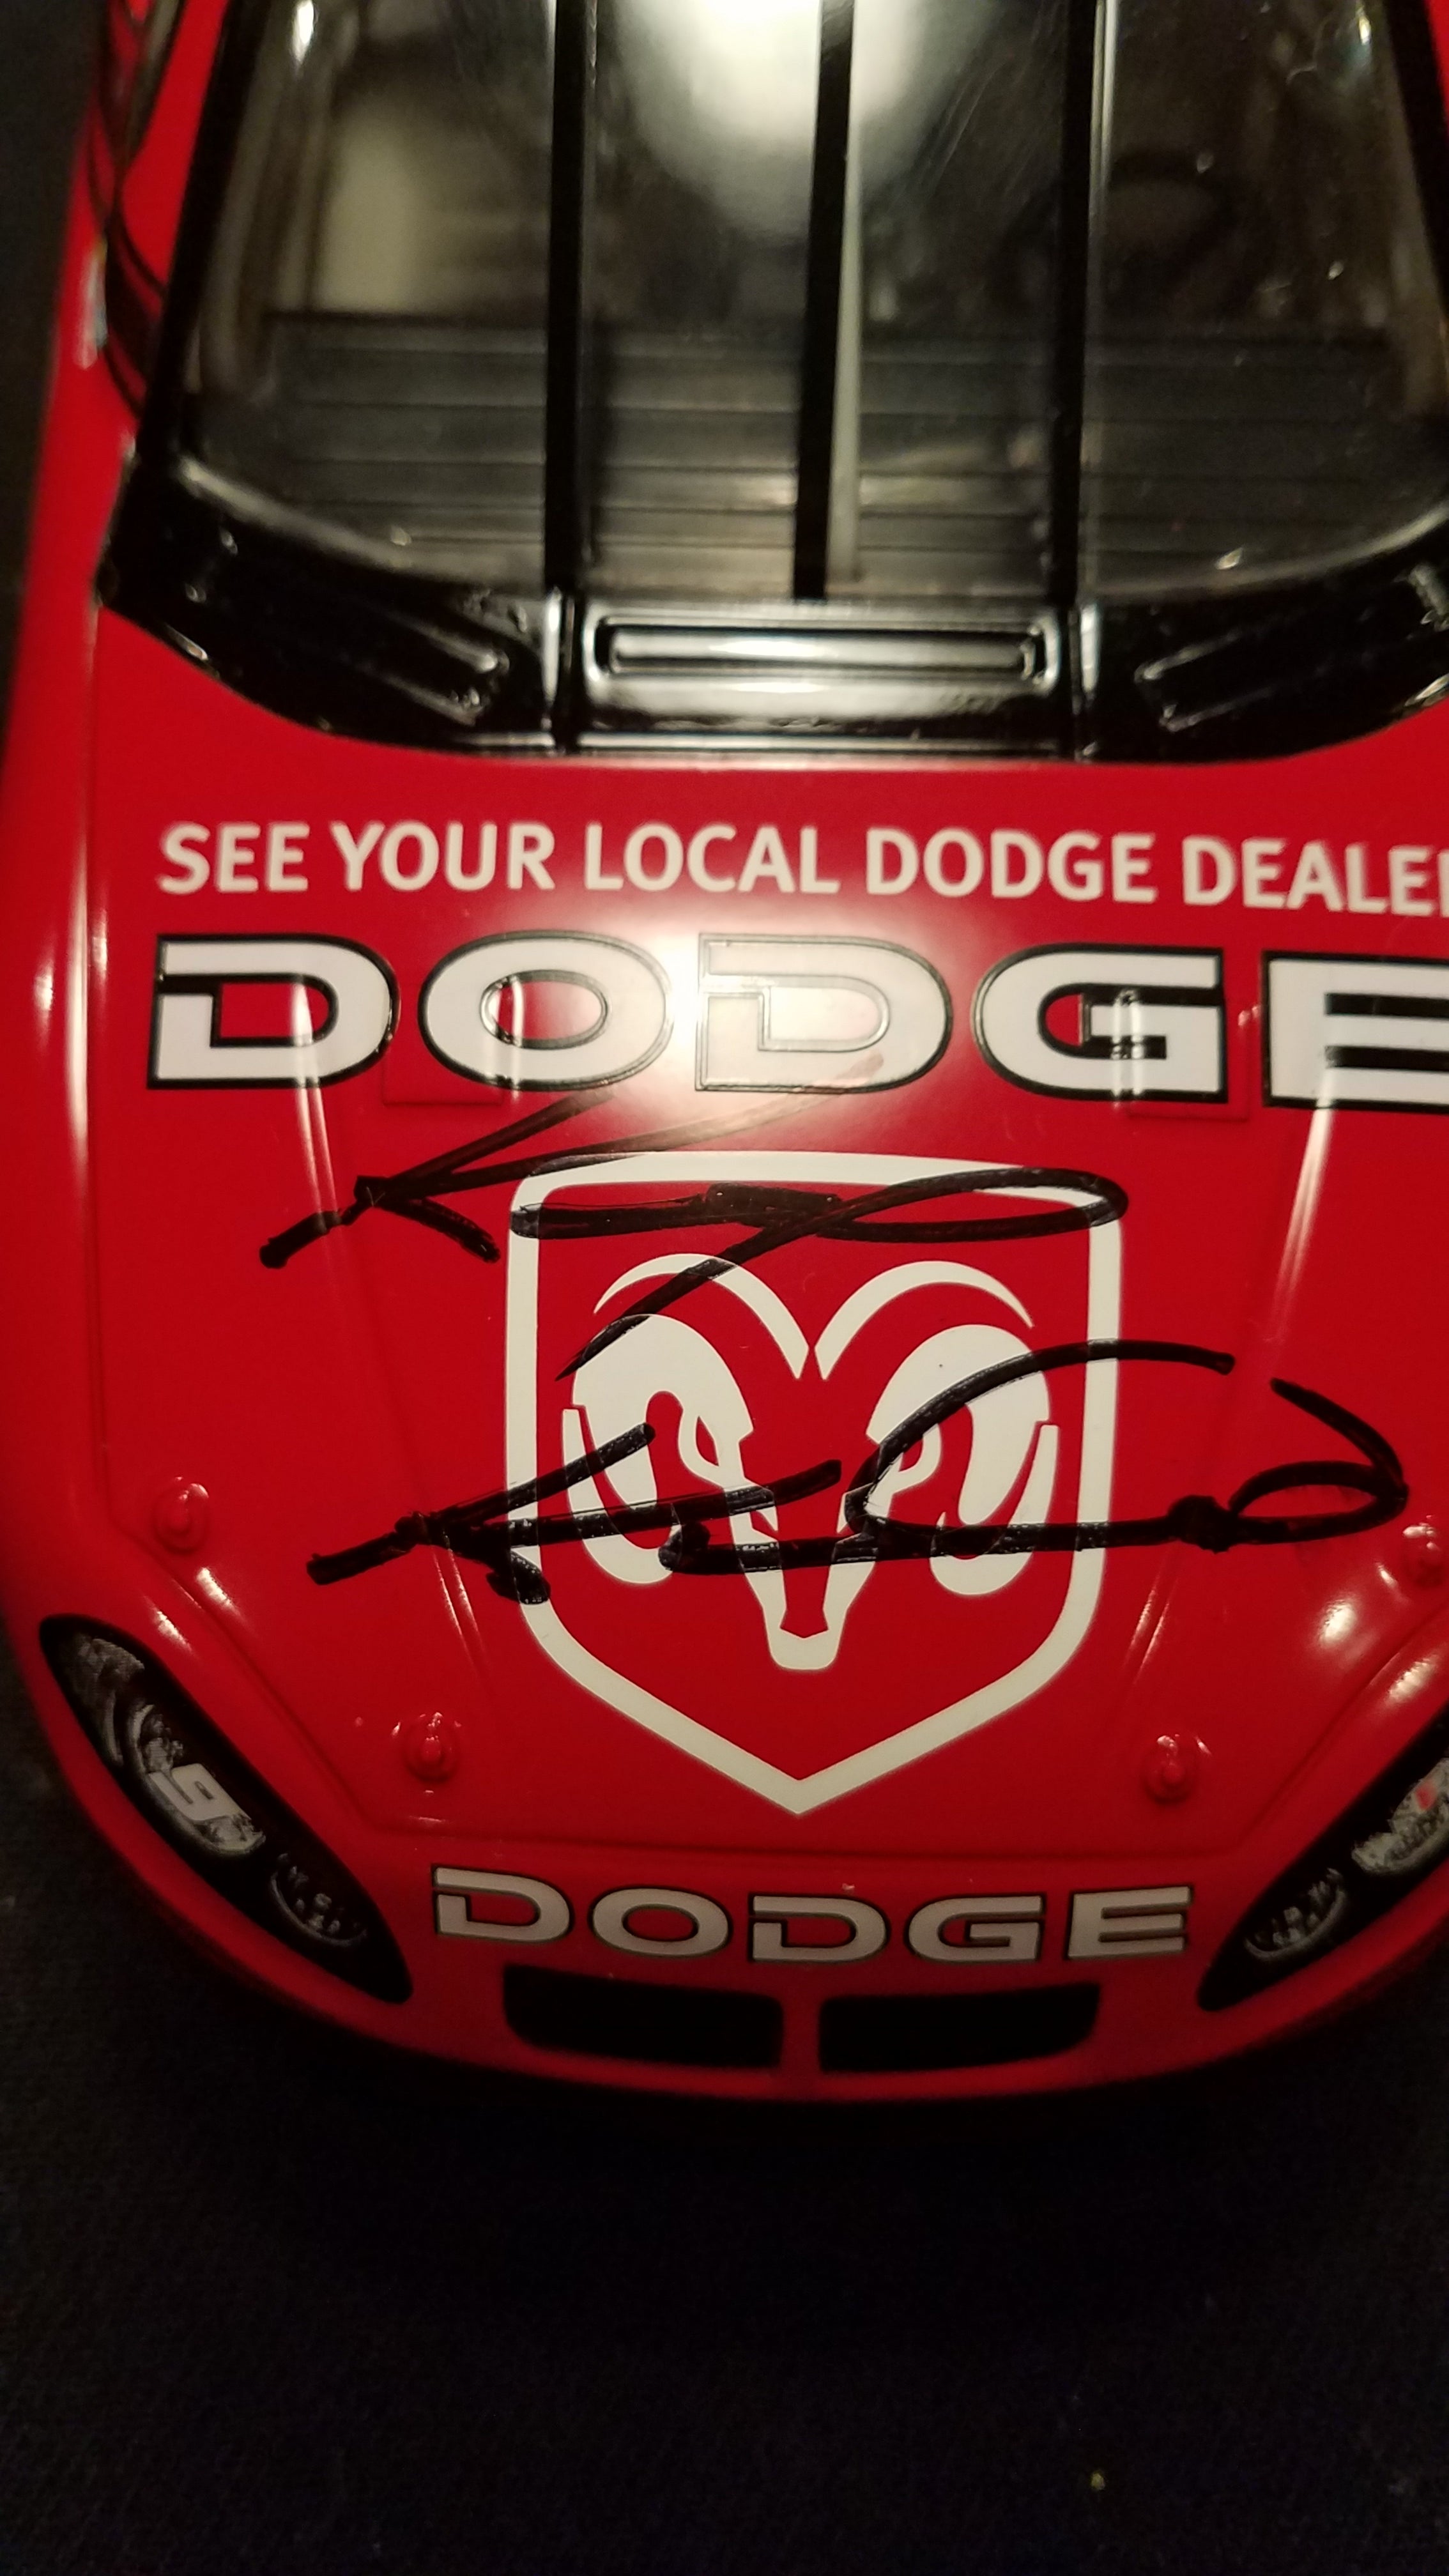 Autographed Kasey Kahne Dodge Raybestos Rookie of the Year 1:24 Diecast